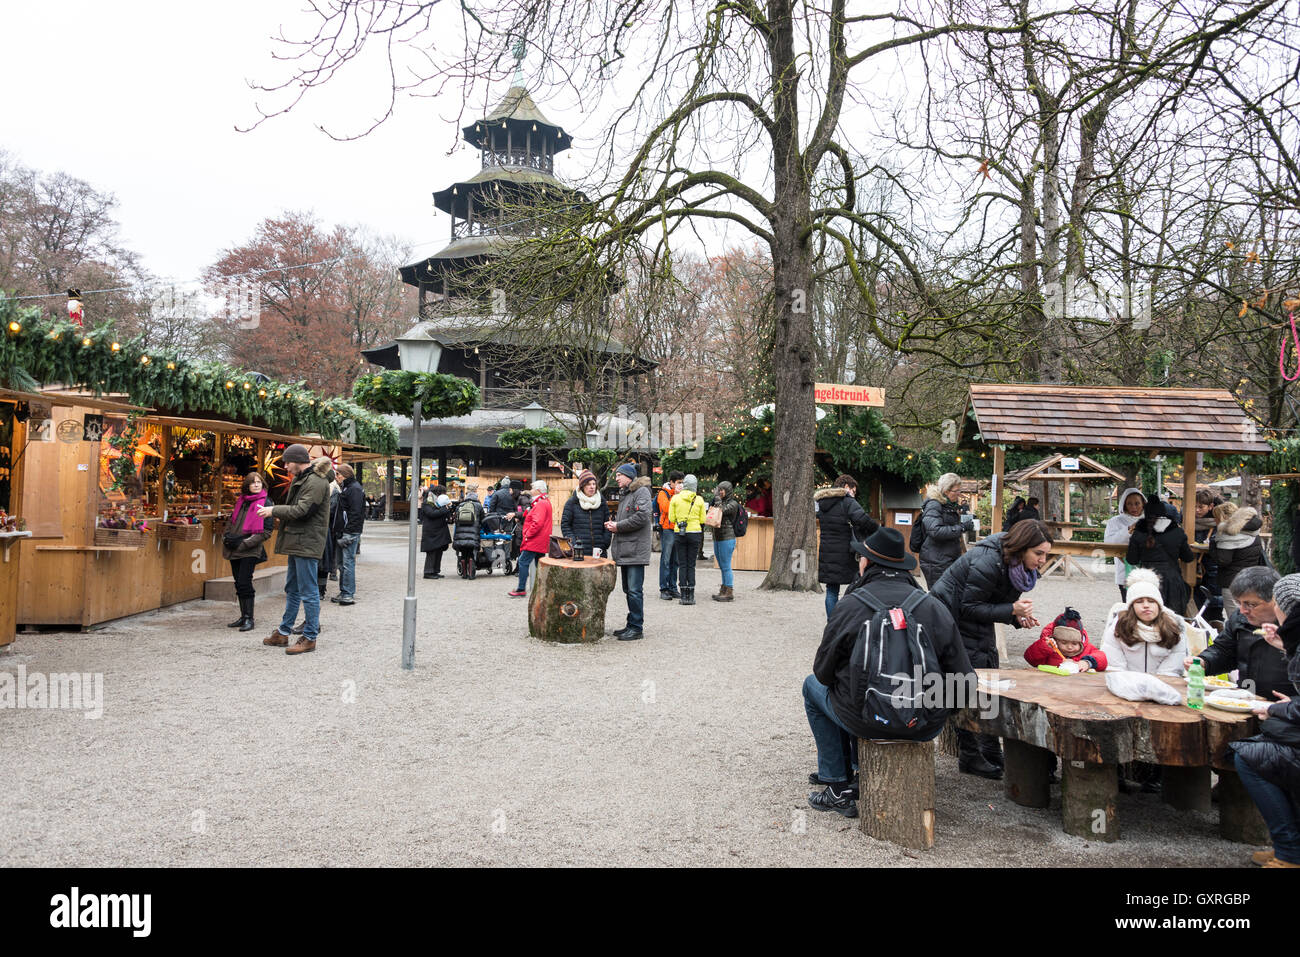 A Christmas market was held around the wooden structured Chinese Tower in the English Gardens in Munich, Bavaria, Germany. Stock Photo